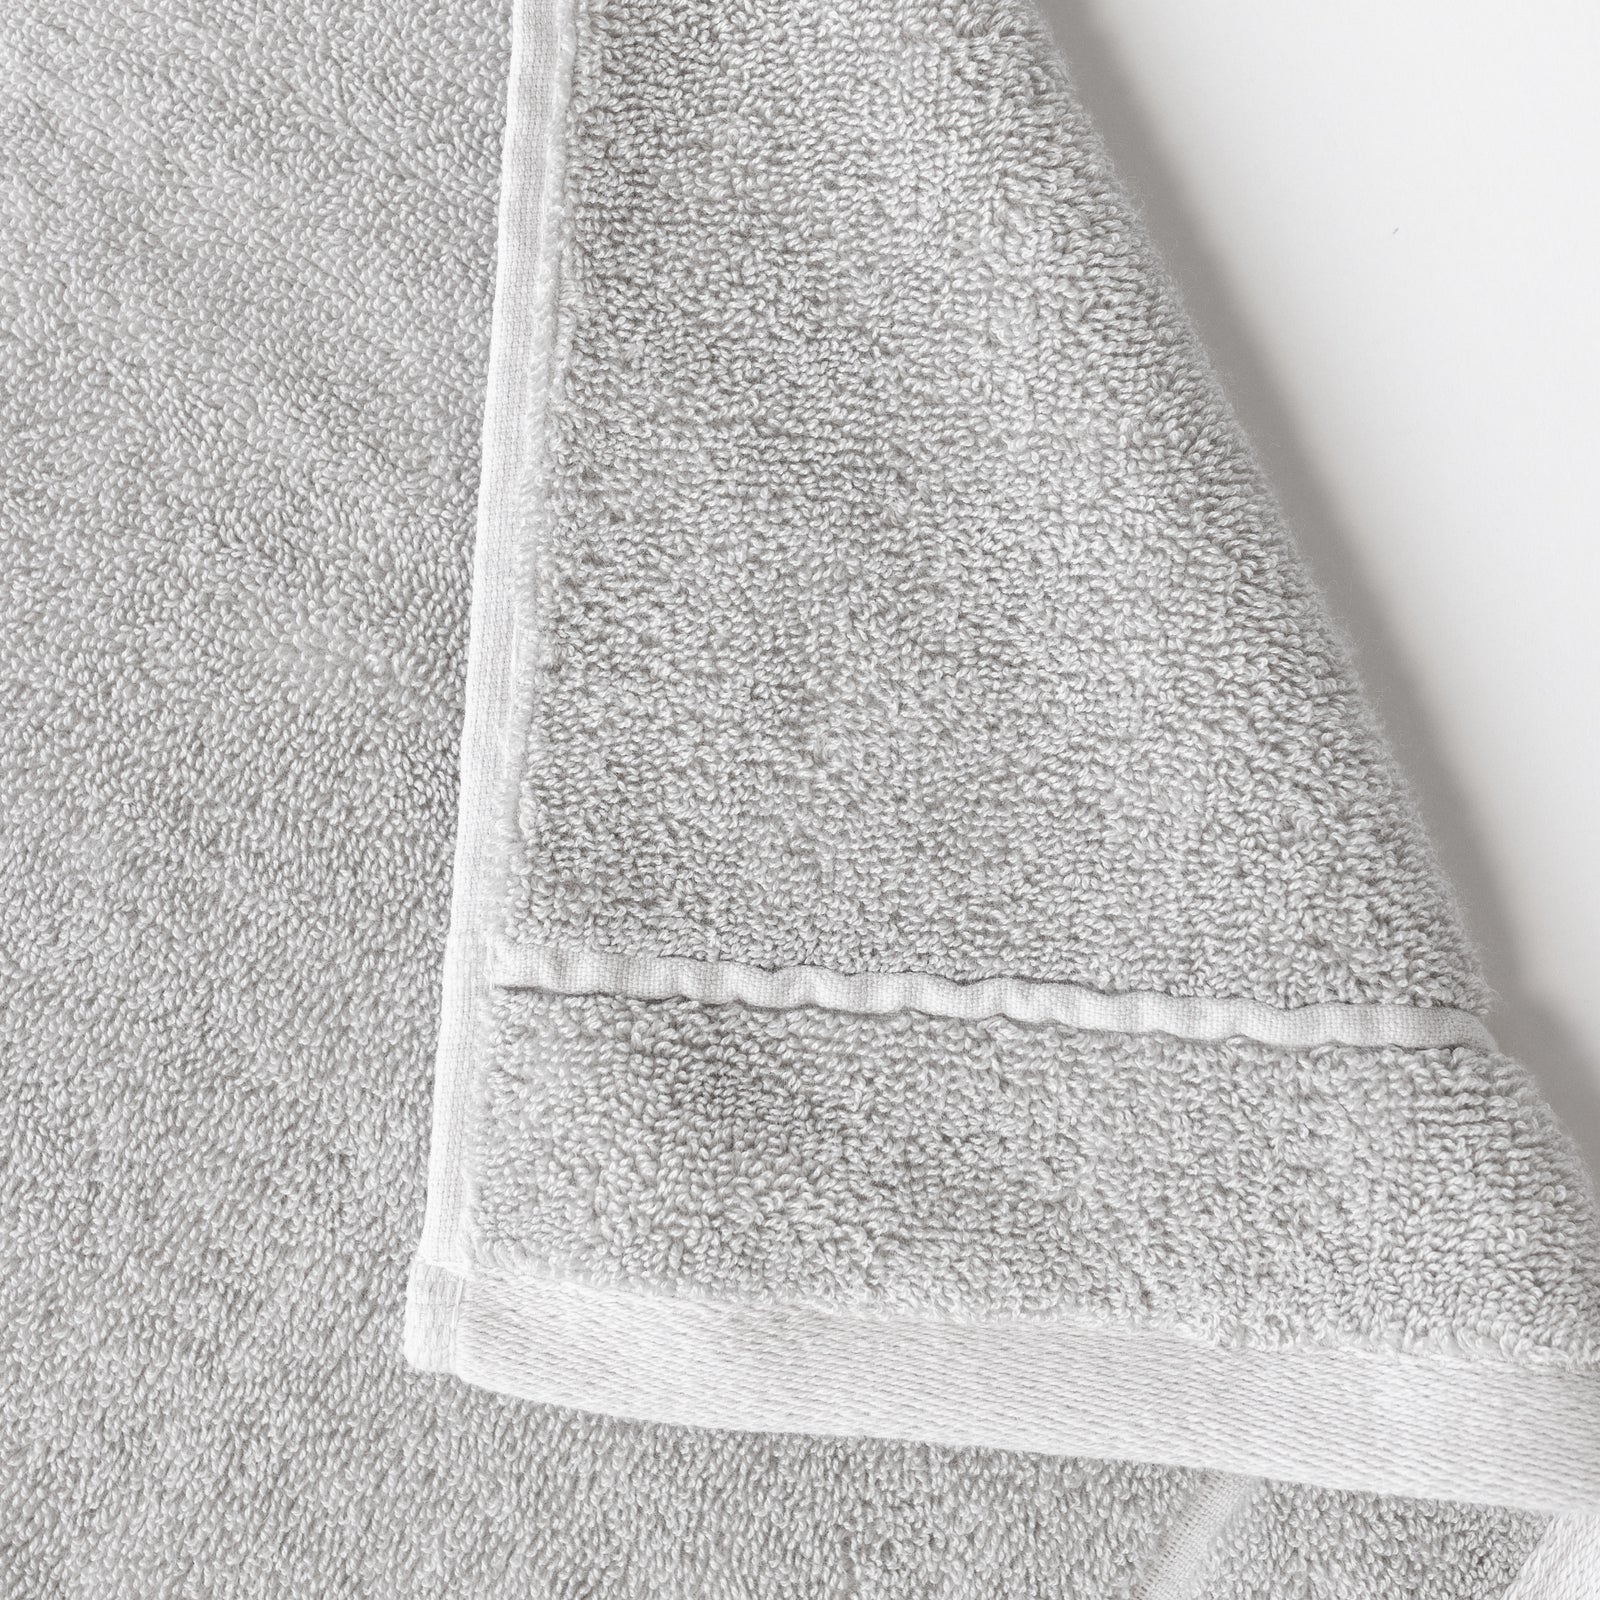 Light Grey Premium Plush Bath Towel. Photo of Premium Plush Bath Towels taken on a white background showing only the corner of the towel. 